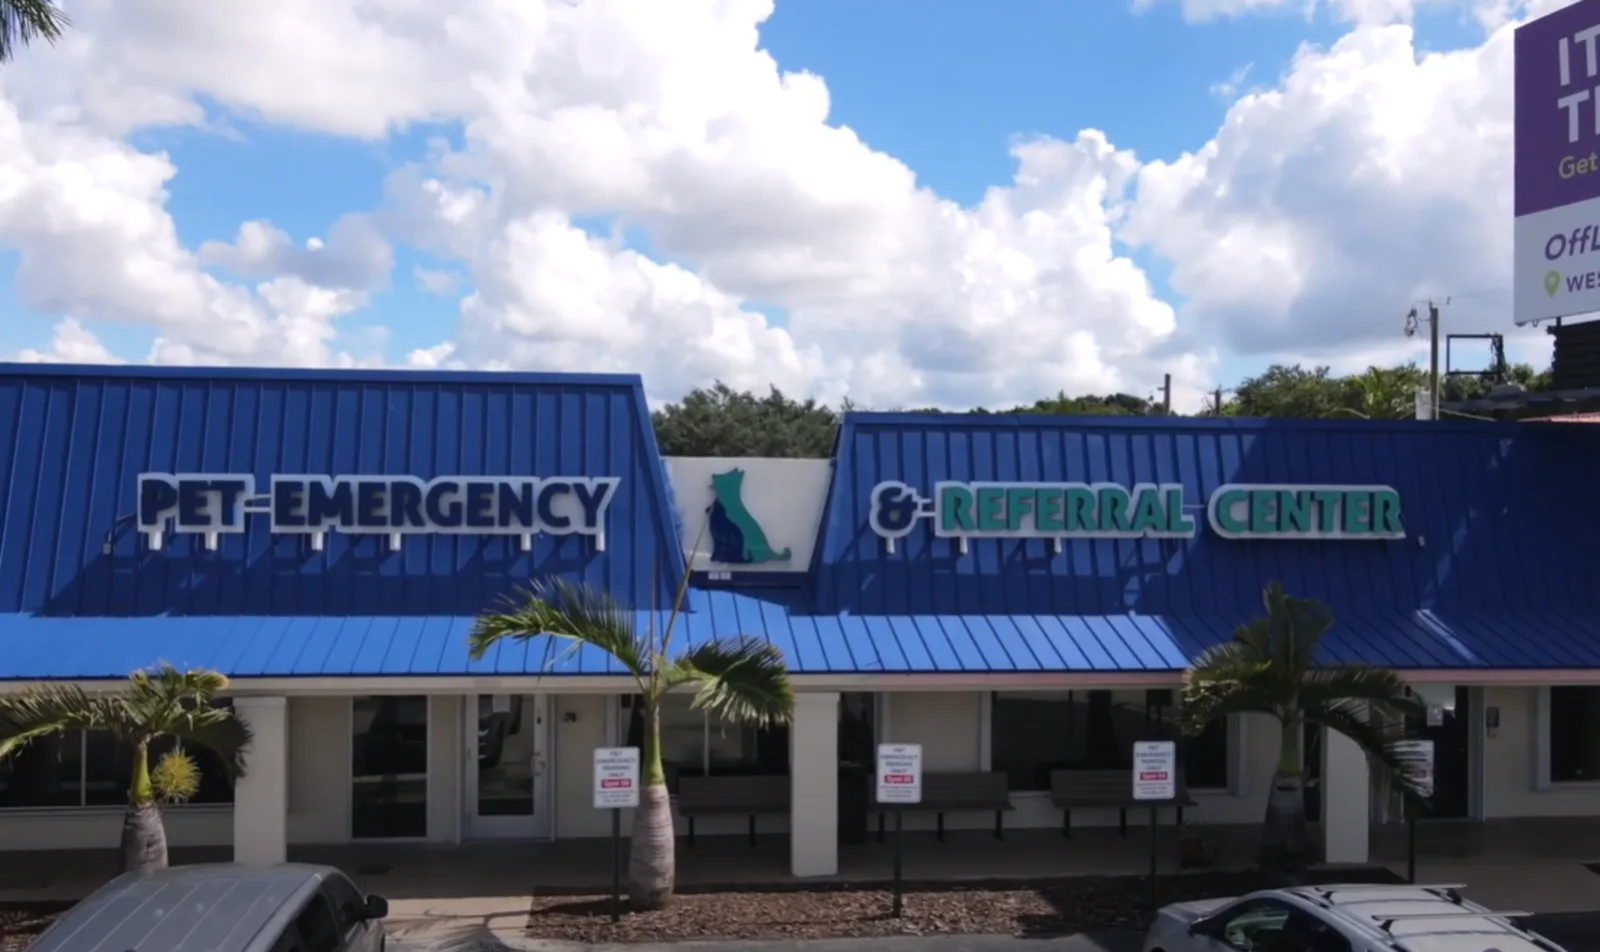 Welcome to Pet Emergency & Referral Center video image of the parking lot view of Pet Emergency & Referral Center 